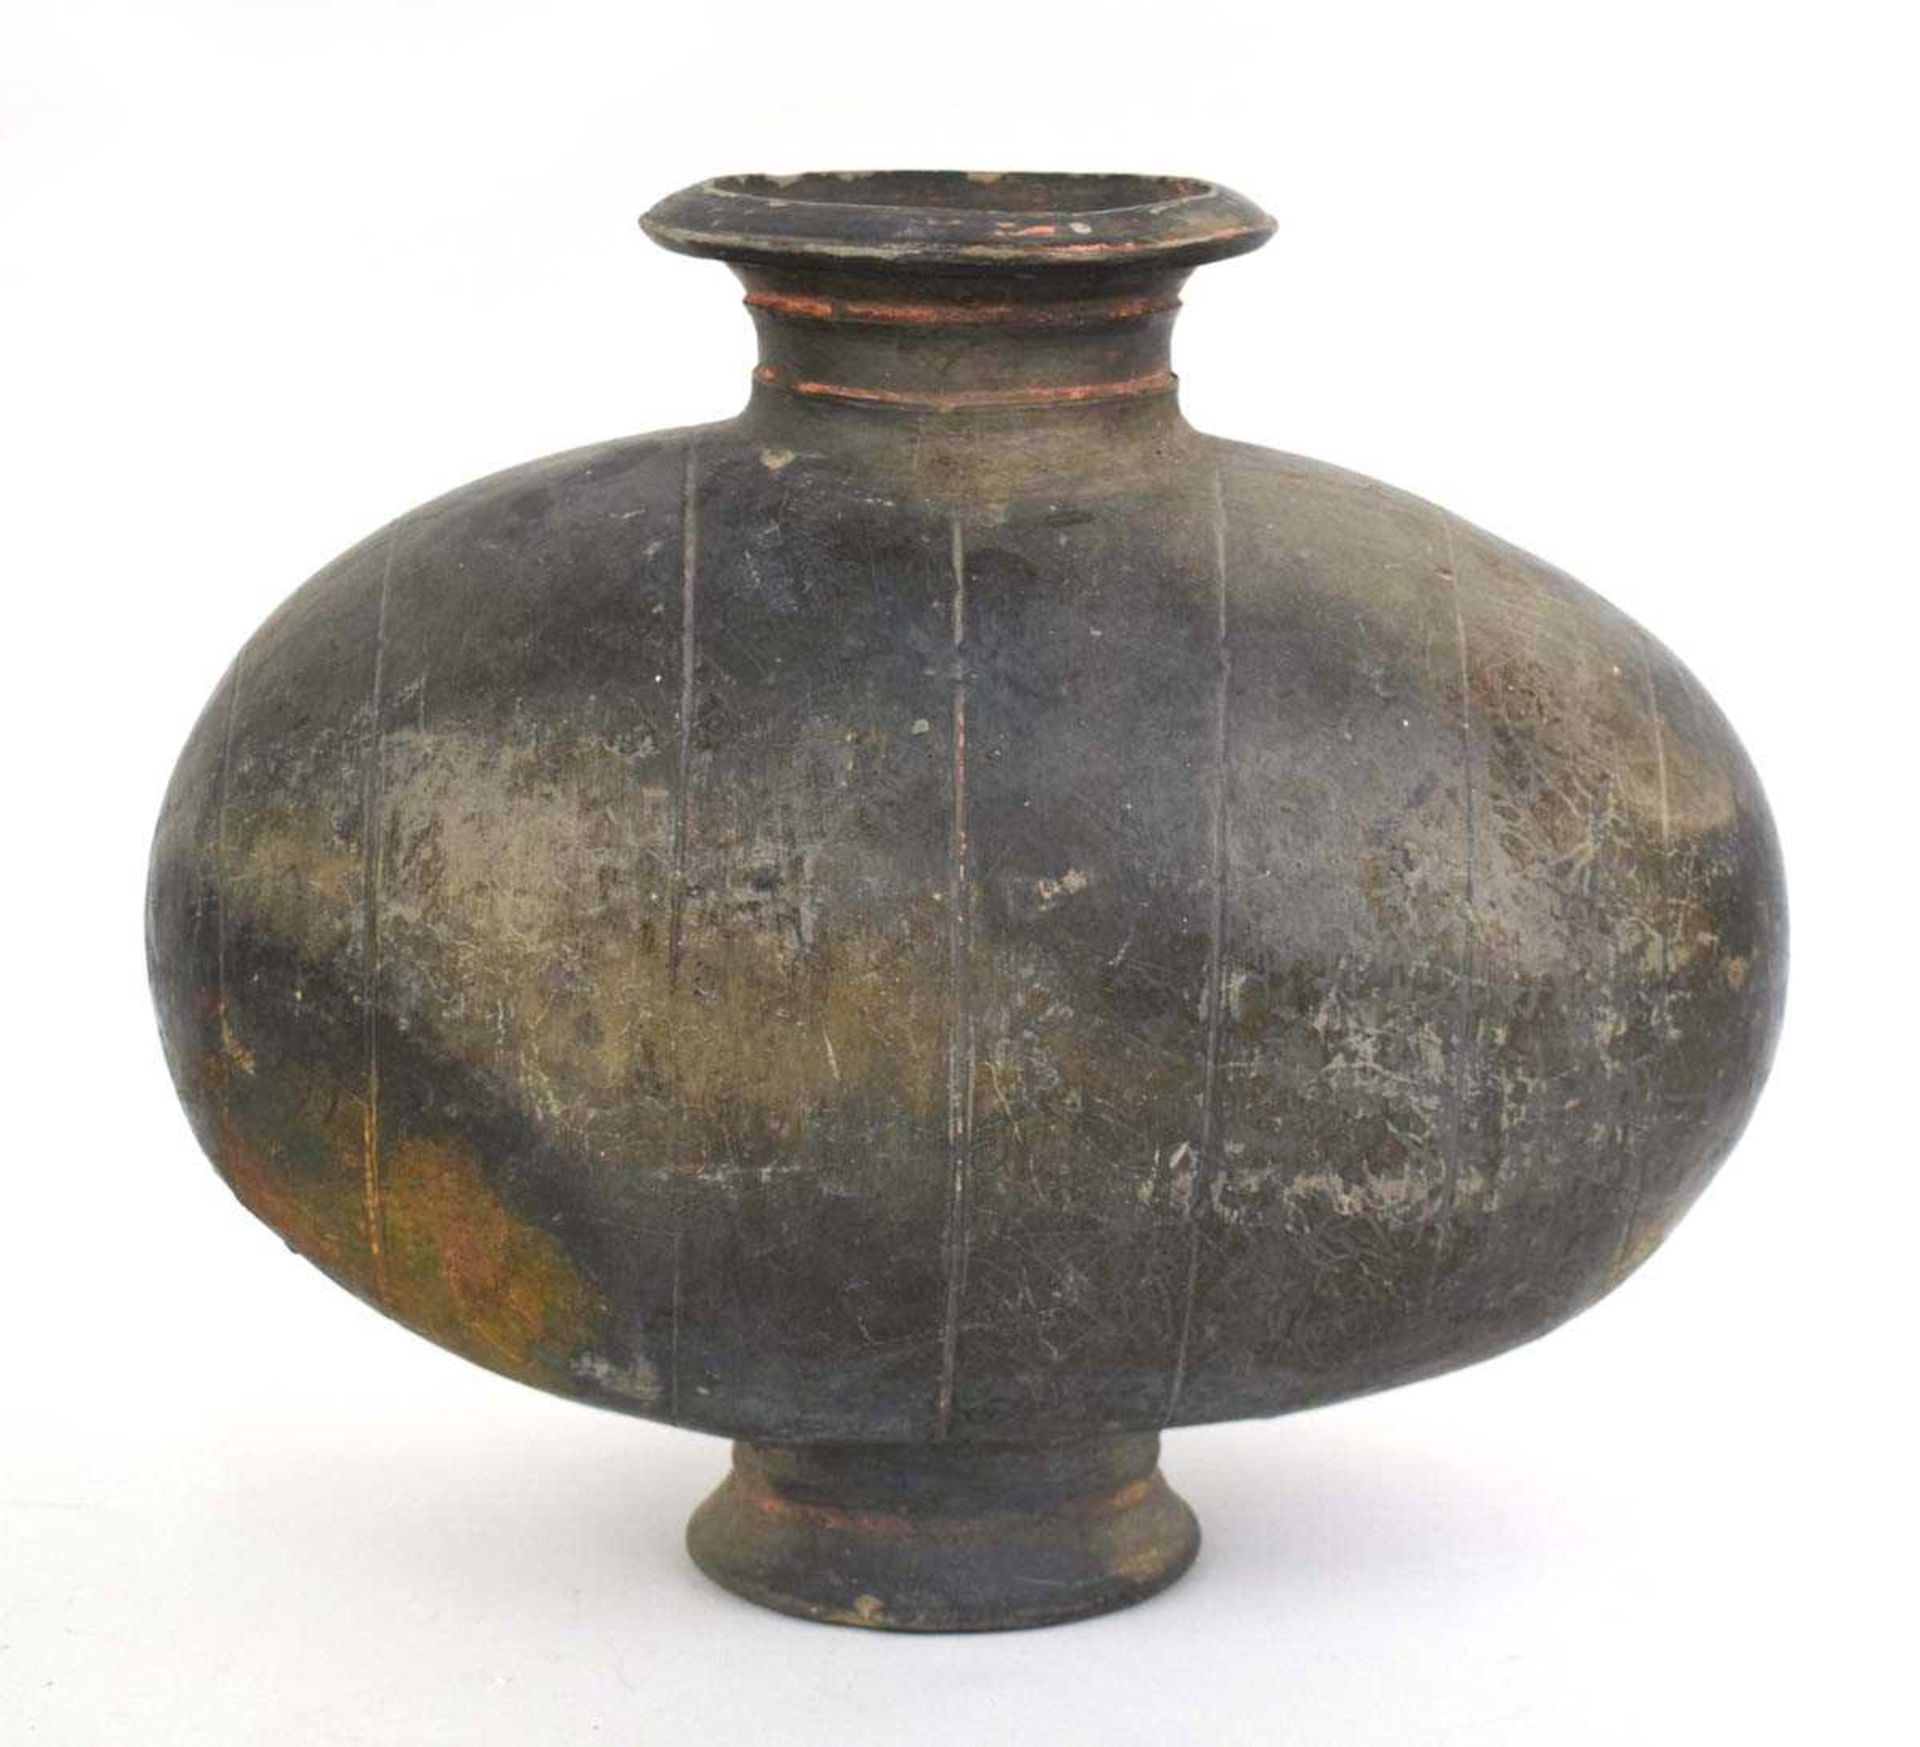 A Chinese pottery cocoon vase, the ovoid body incised with vertical geometric bands, probably Han